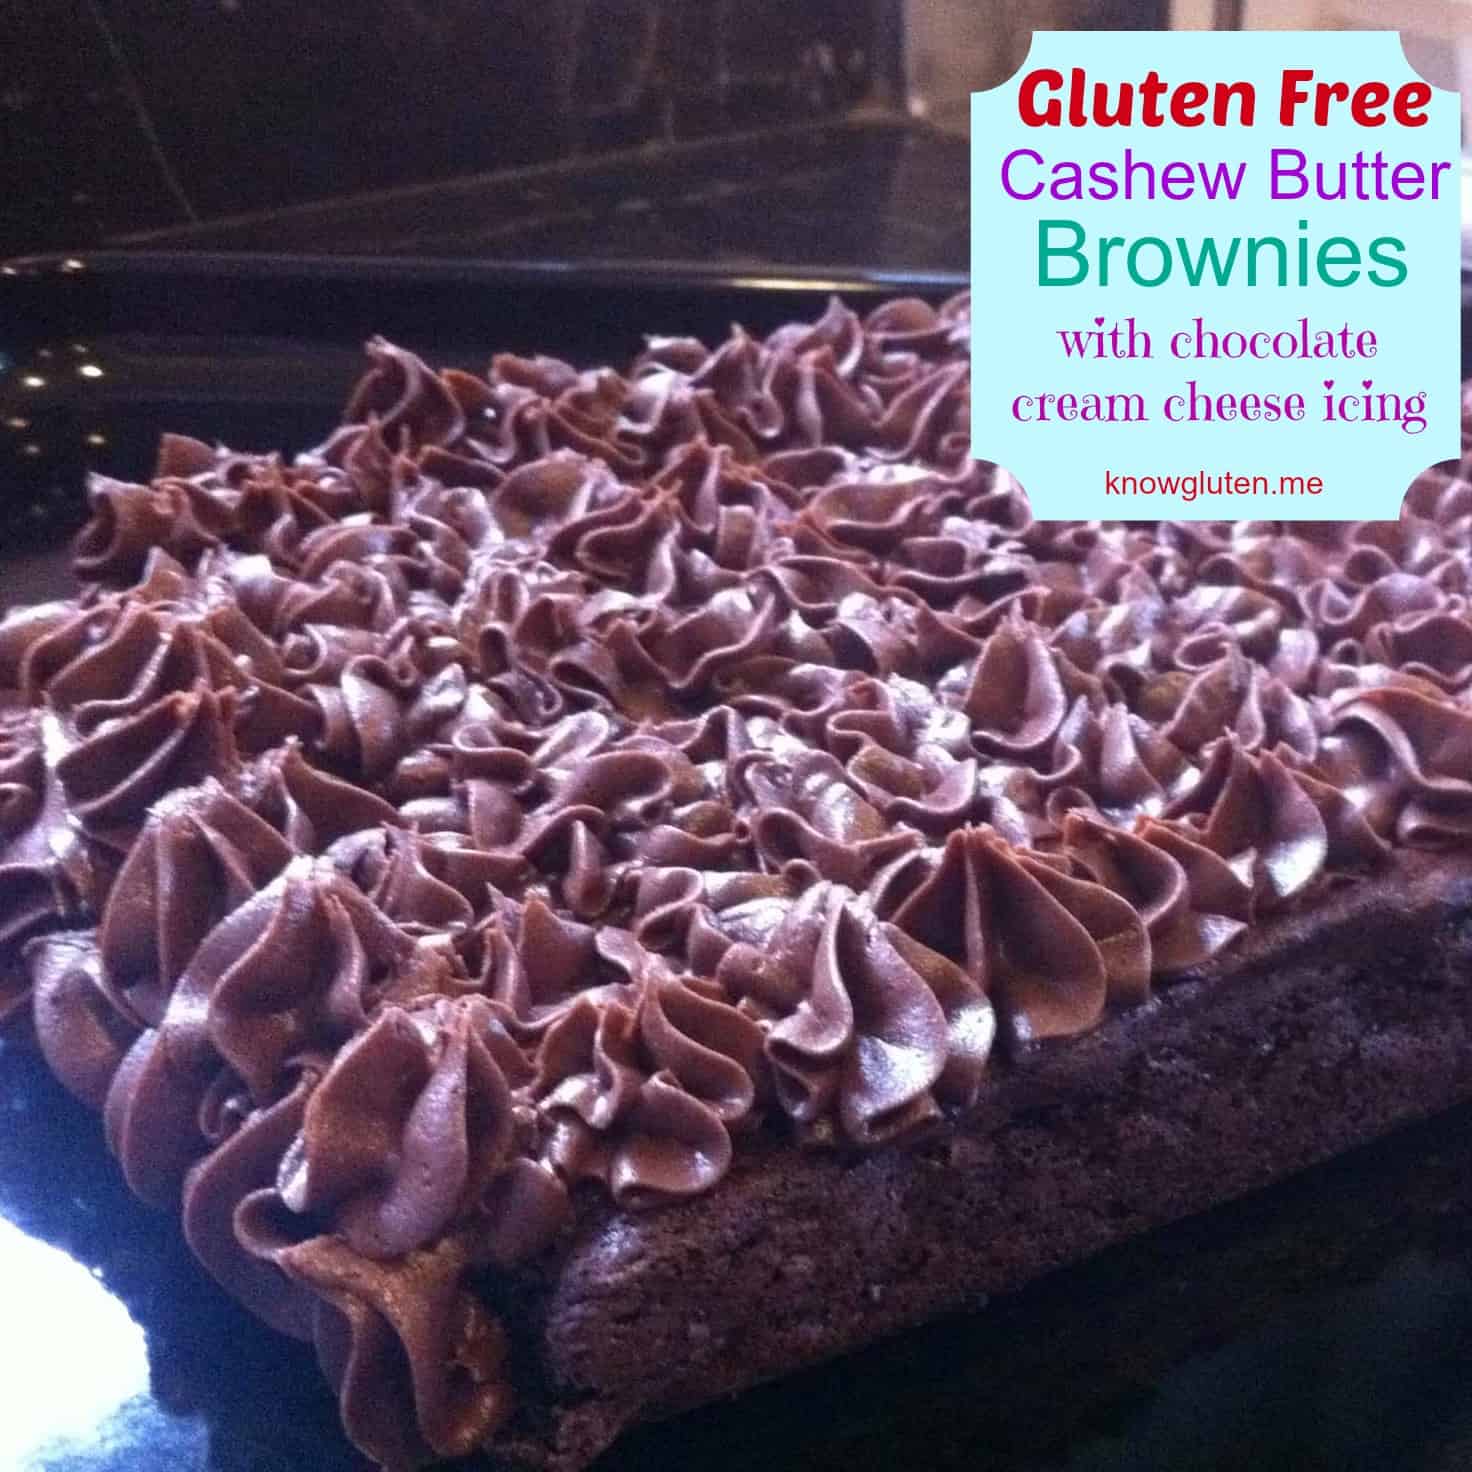 Gluten Free Cashew Butter Brownies with Chocolate Cream Cheese Icing from knowgluten.me